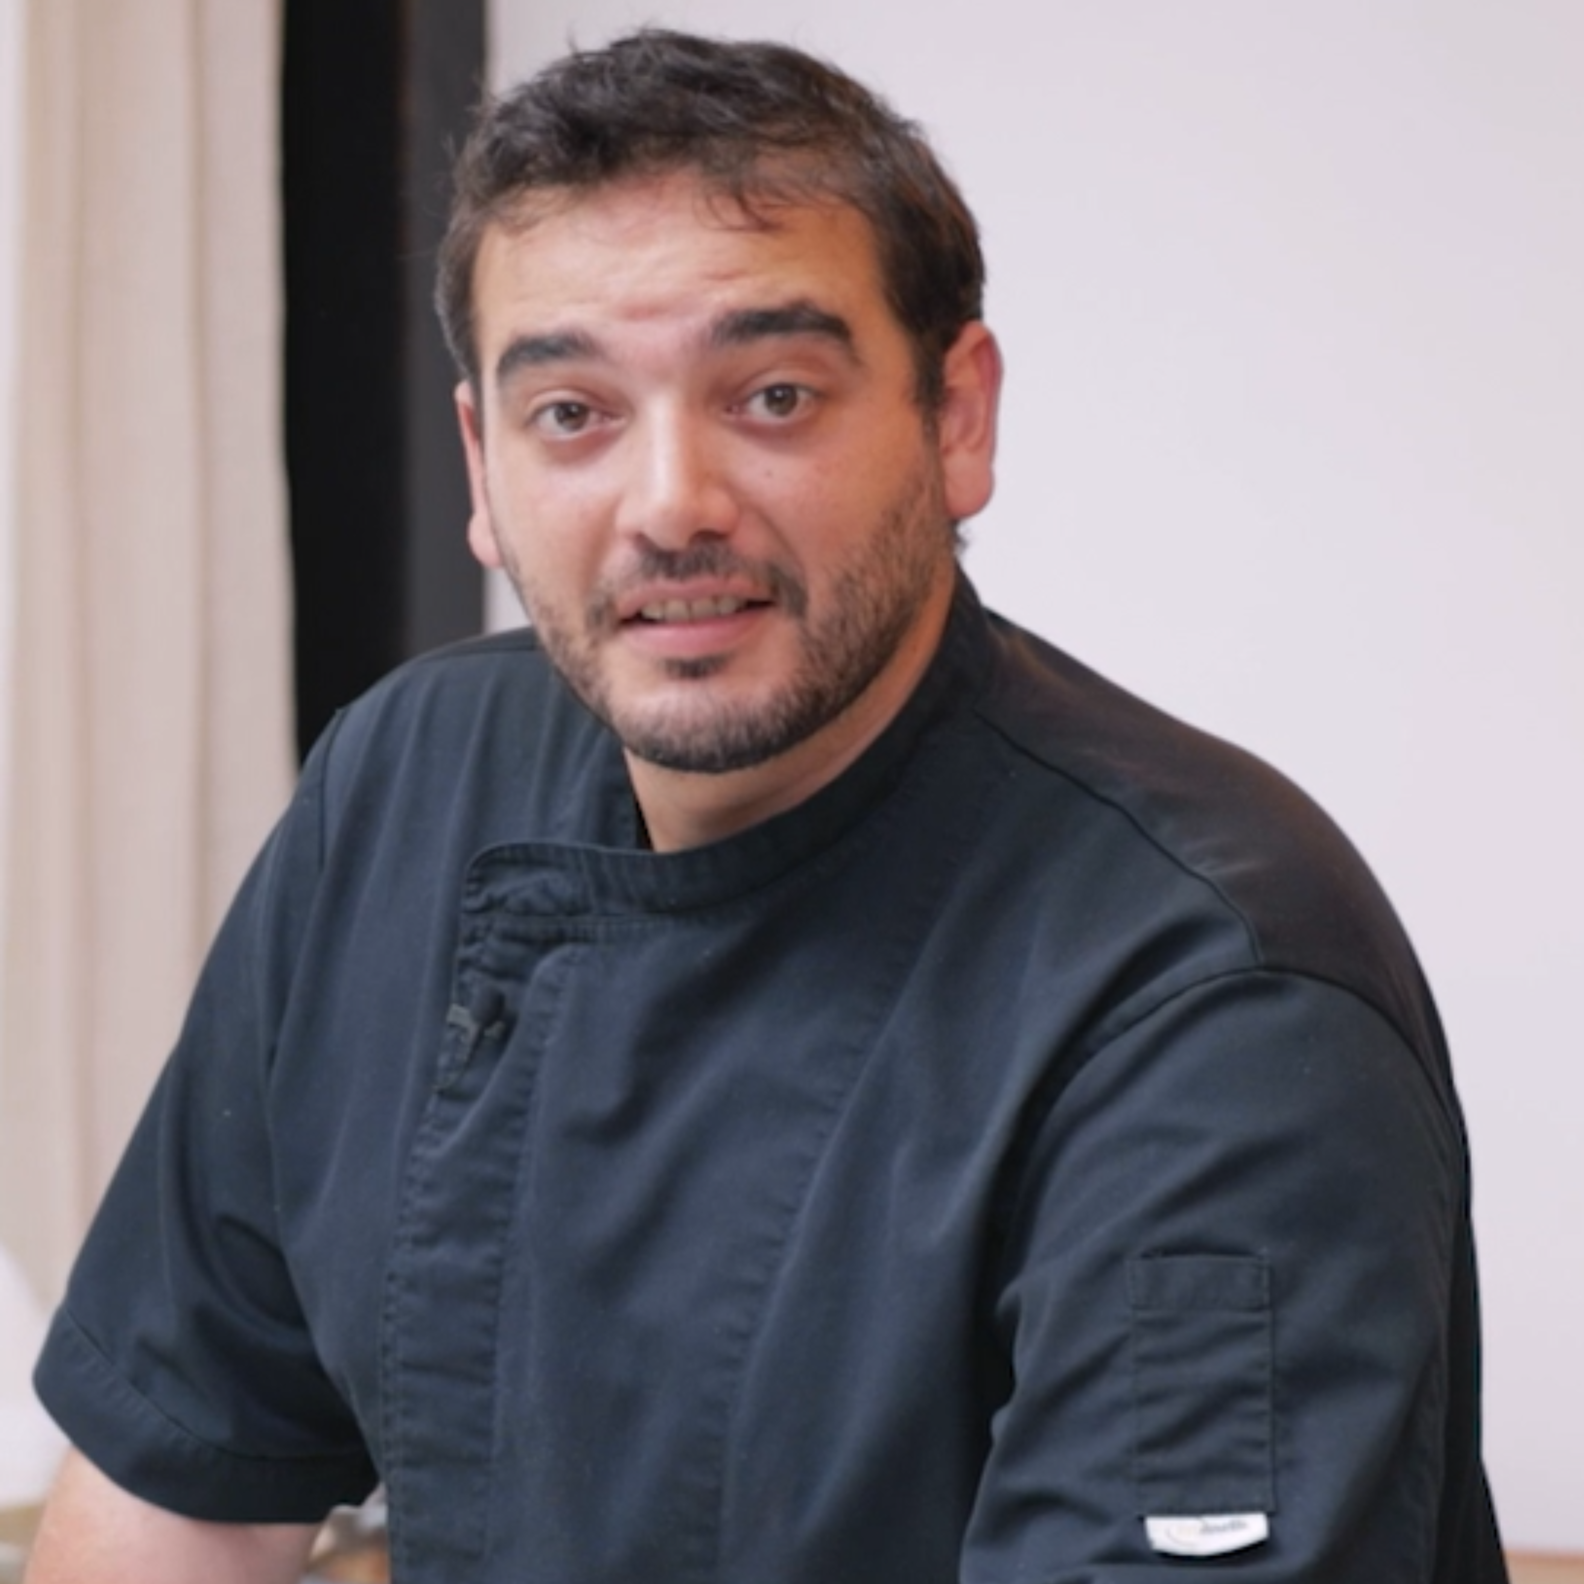 Chef Pierre Sang